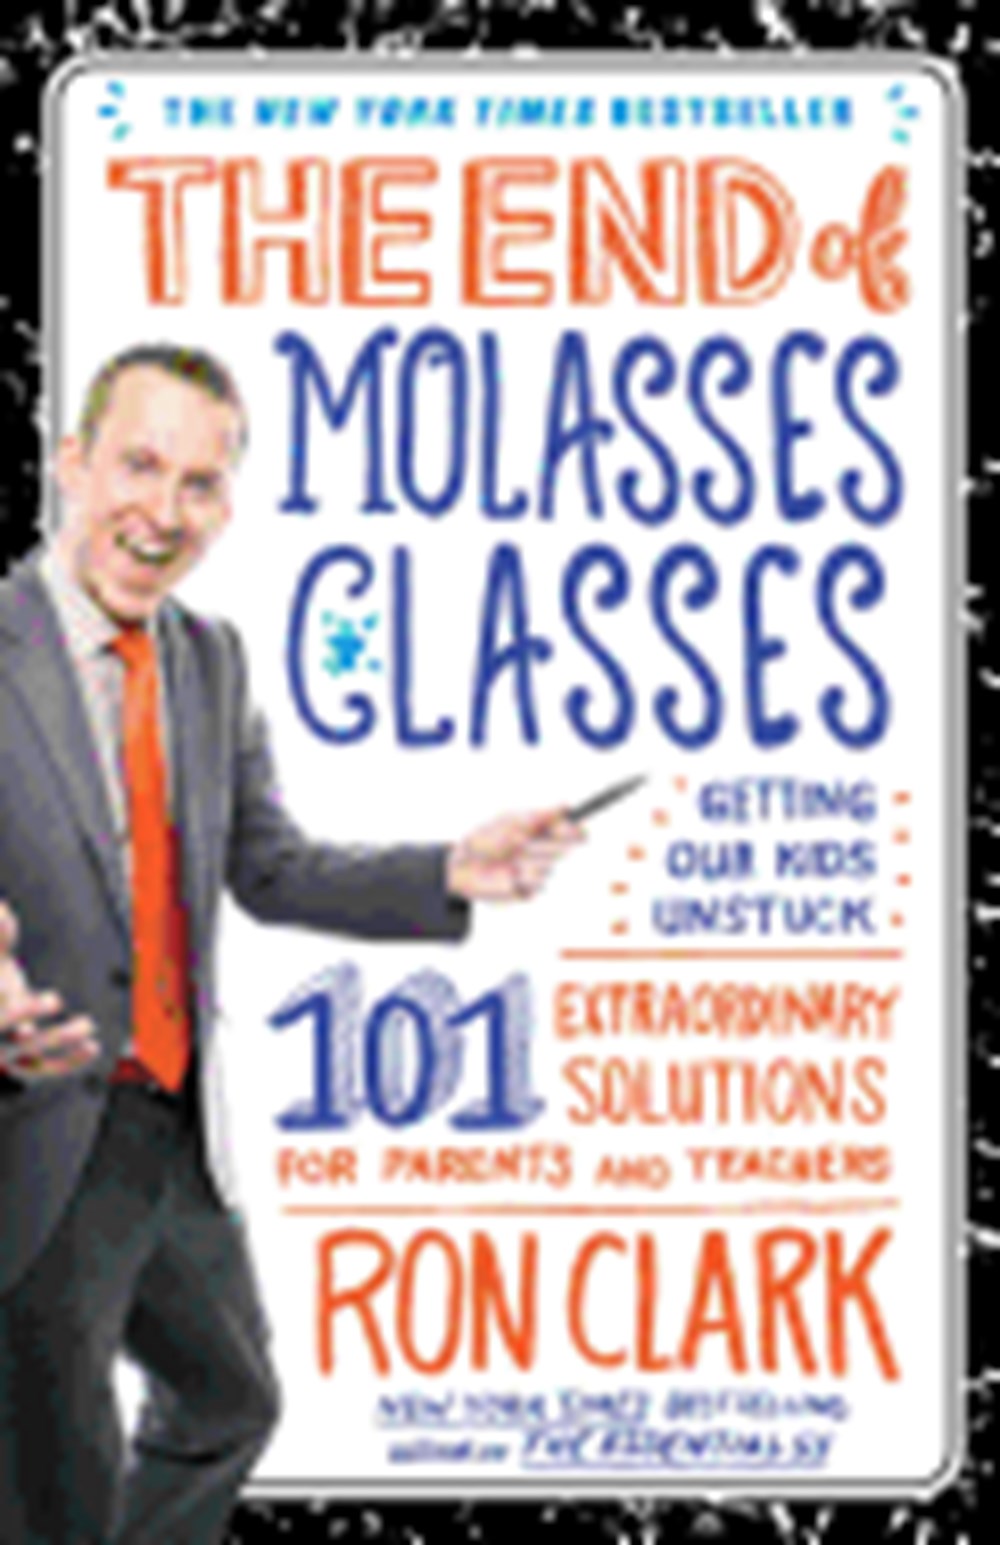 End of Molasses Classes Getting Our Kids Unstuck: 101 Extraordinary Solutions for Parents and Teache